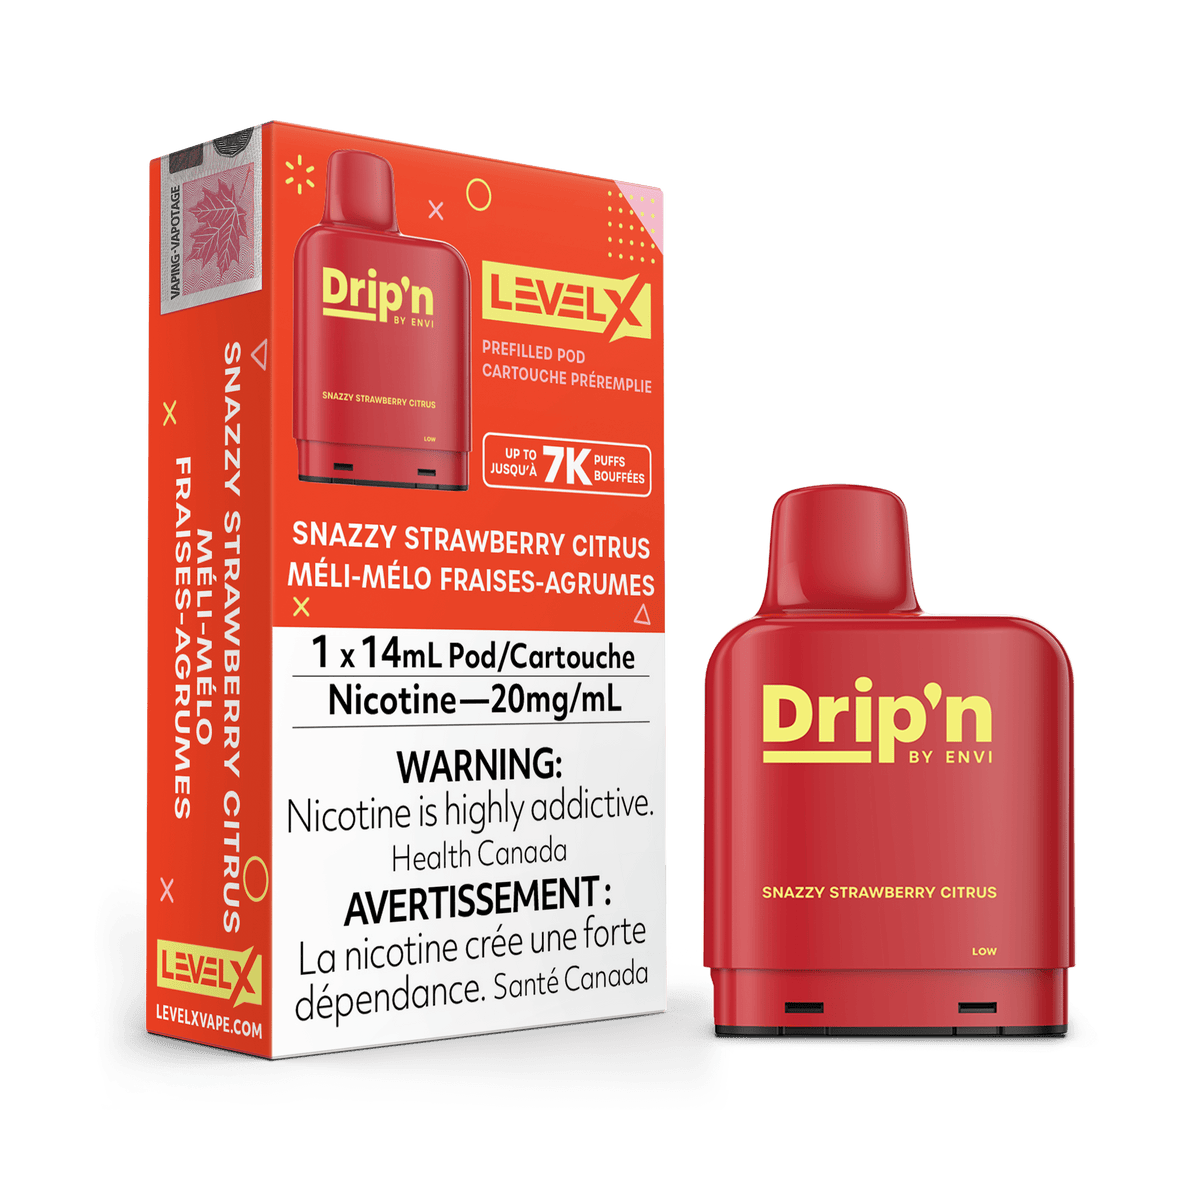 Envi Drip'n Level X Pod - Snazzy Strawberry Citrus available on Canada online vape shop